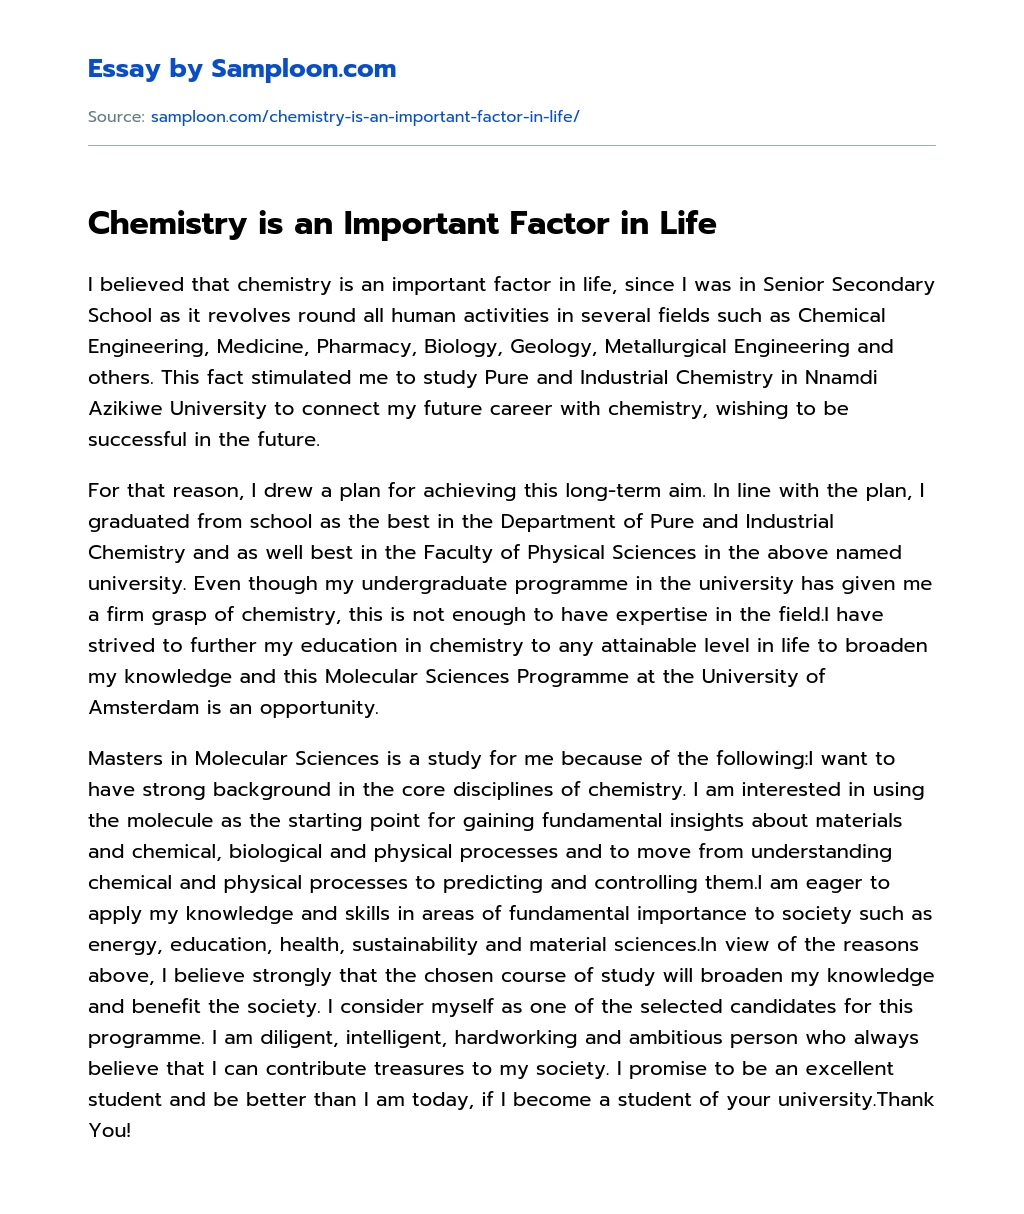 Chemistry is an Important Factor in Life essay